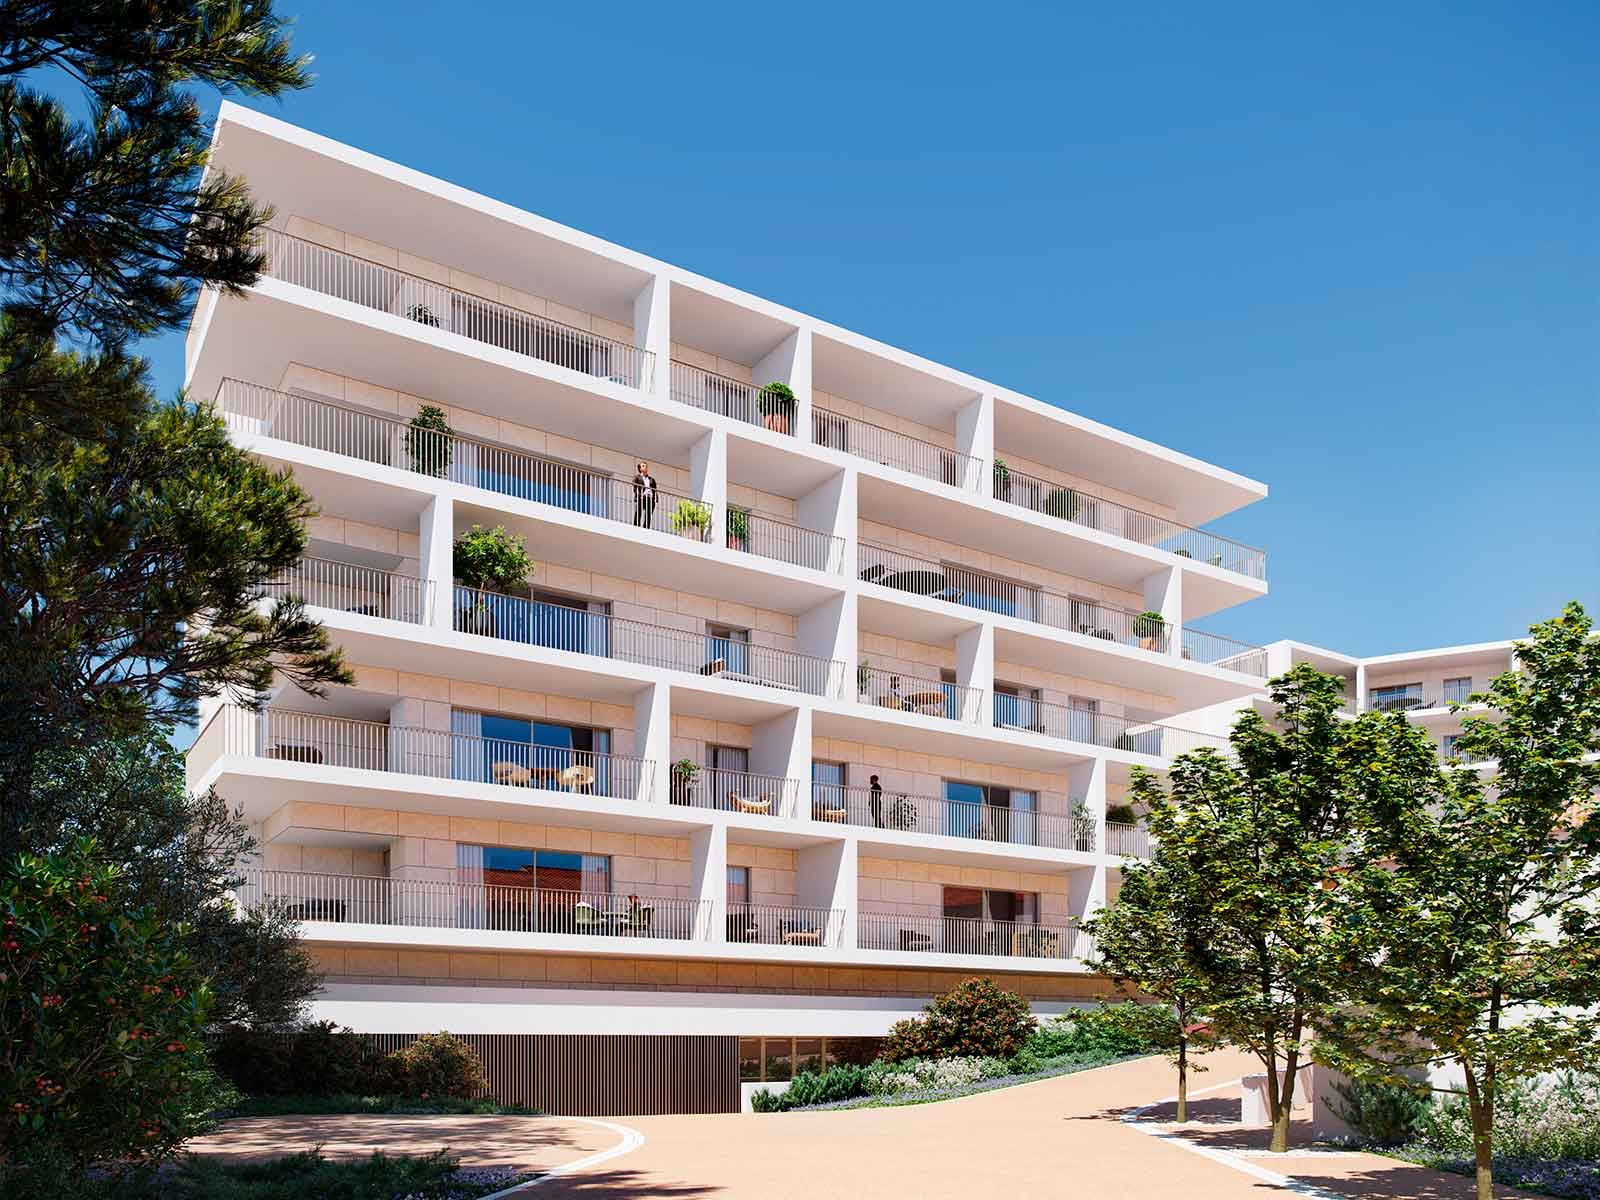 3 bedroom apartment with balcony and parking in new development, Lisbon 727611259